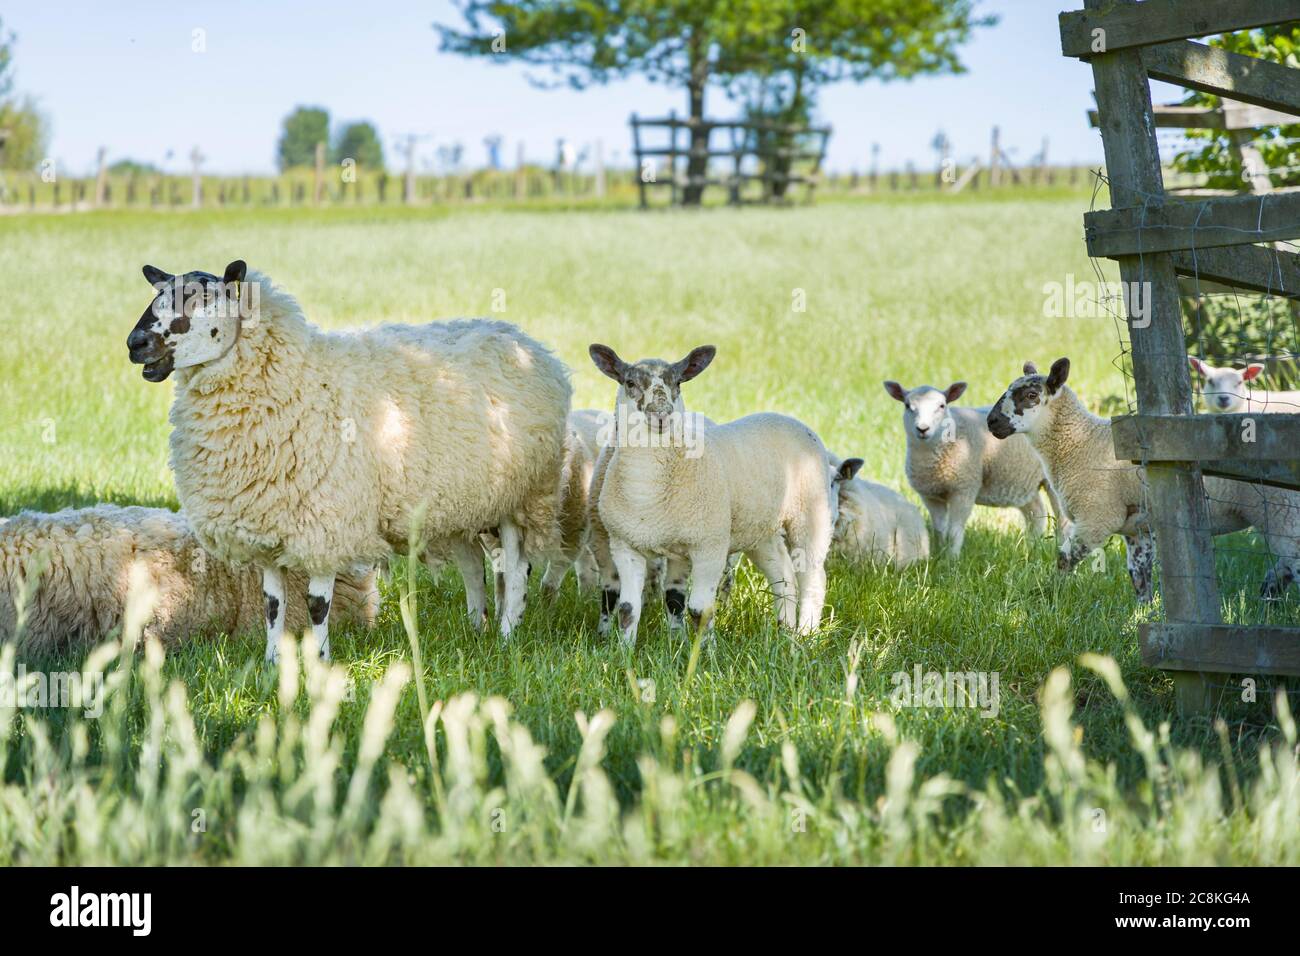 Female sheep (ewe) and young lambs in a field in Buckinghamshire countryside, UK Stock Photo